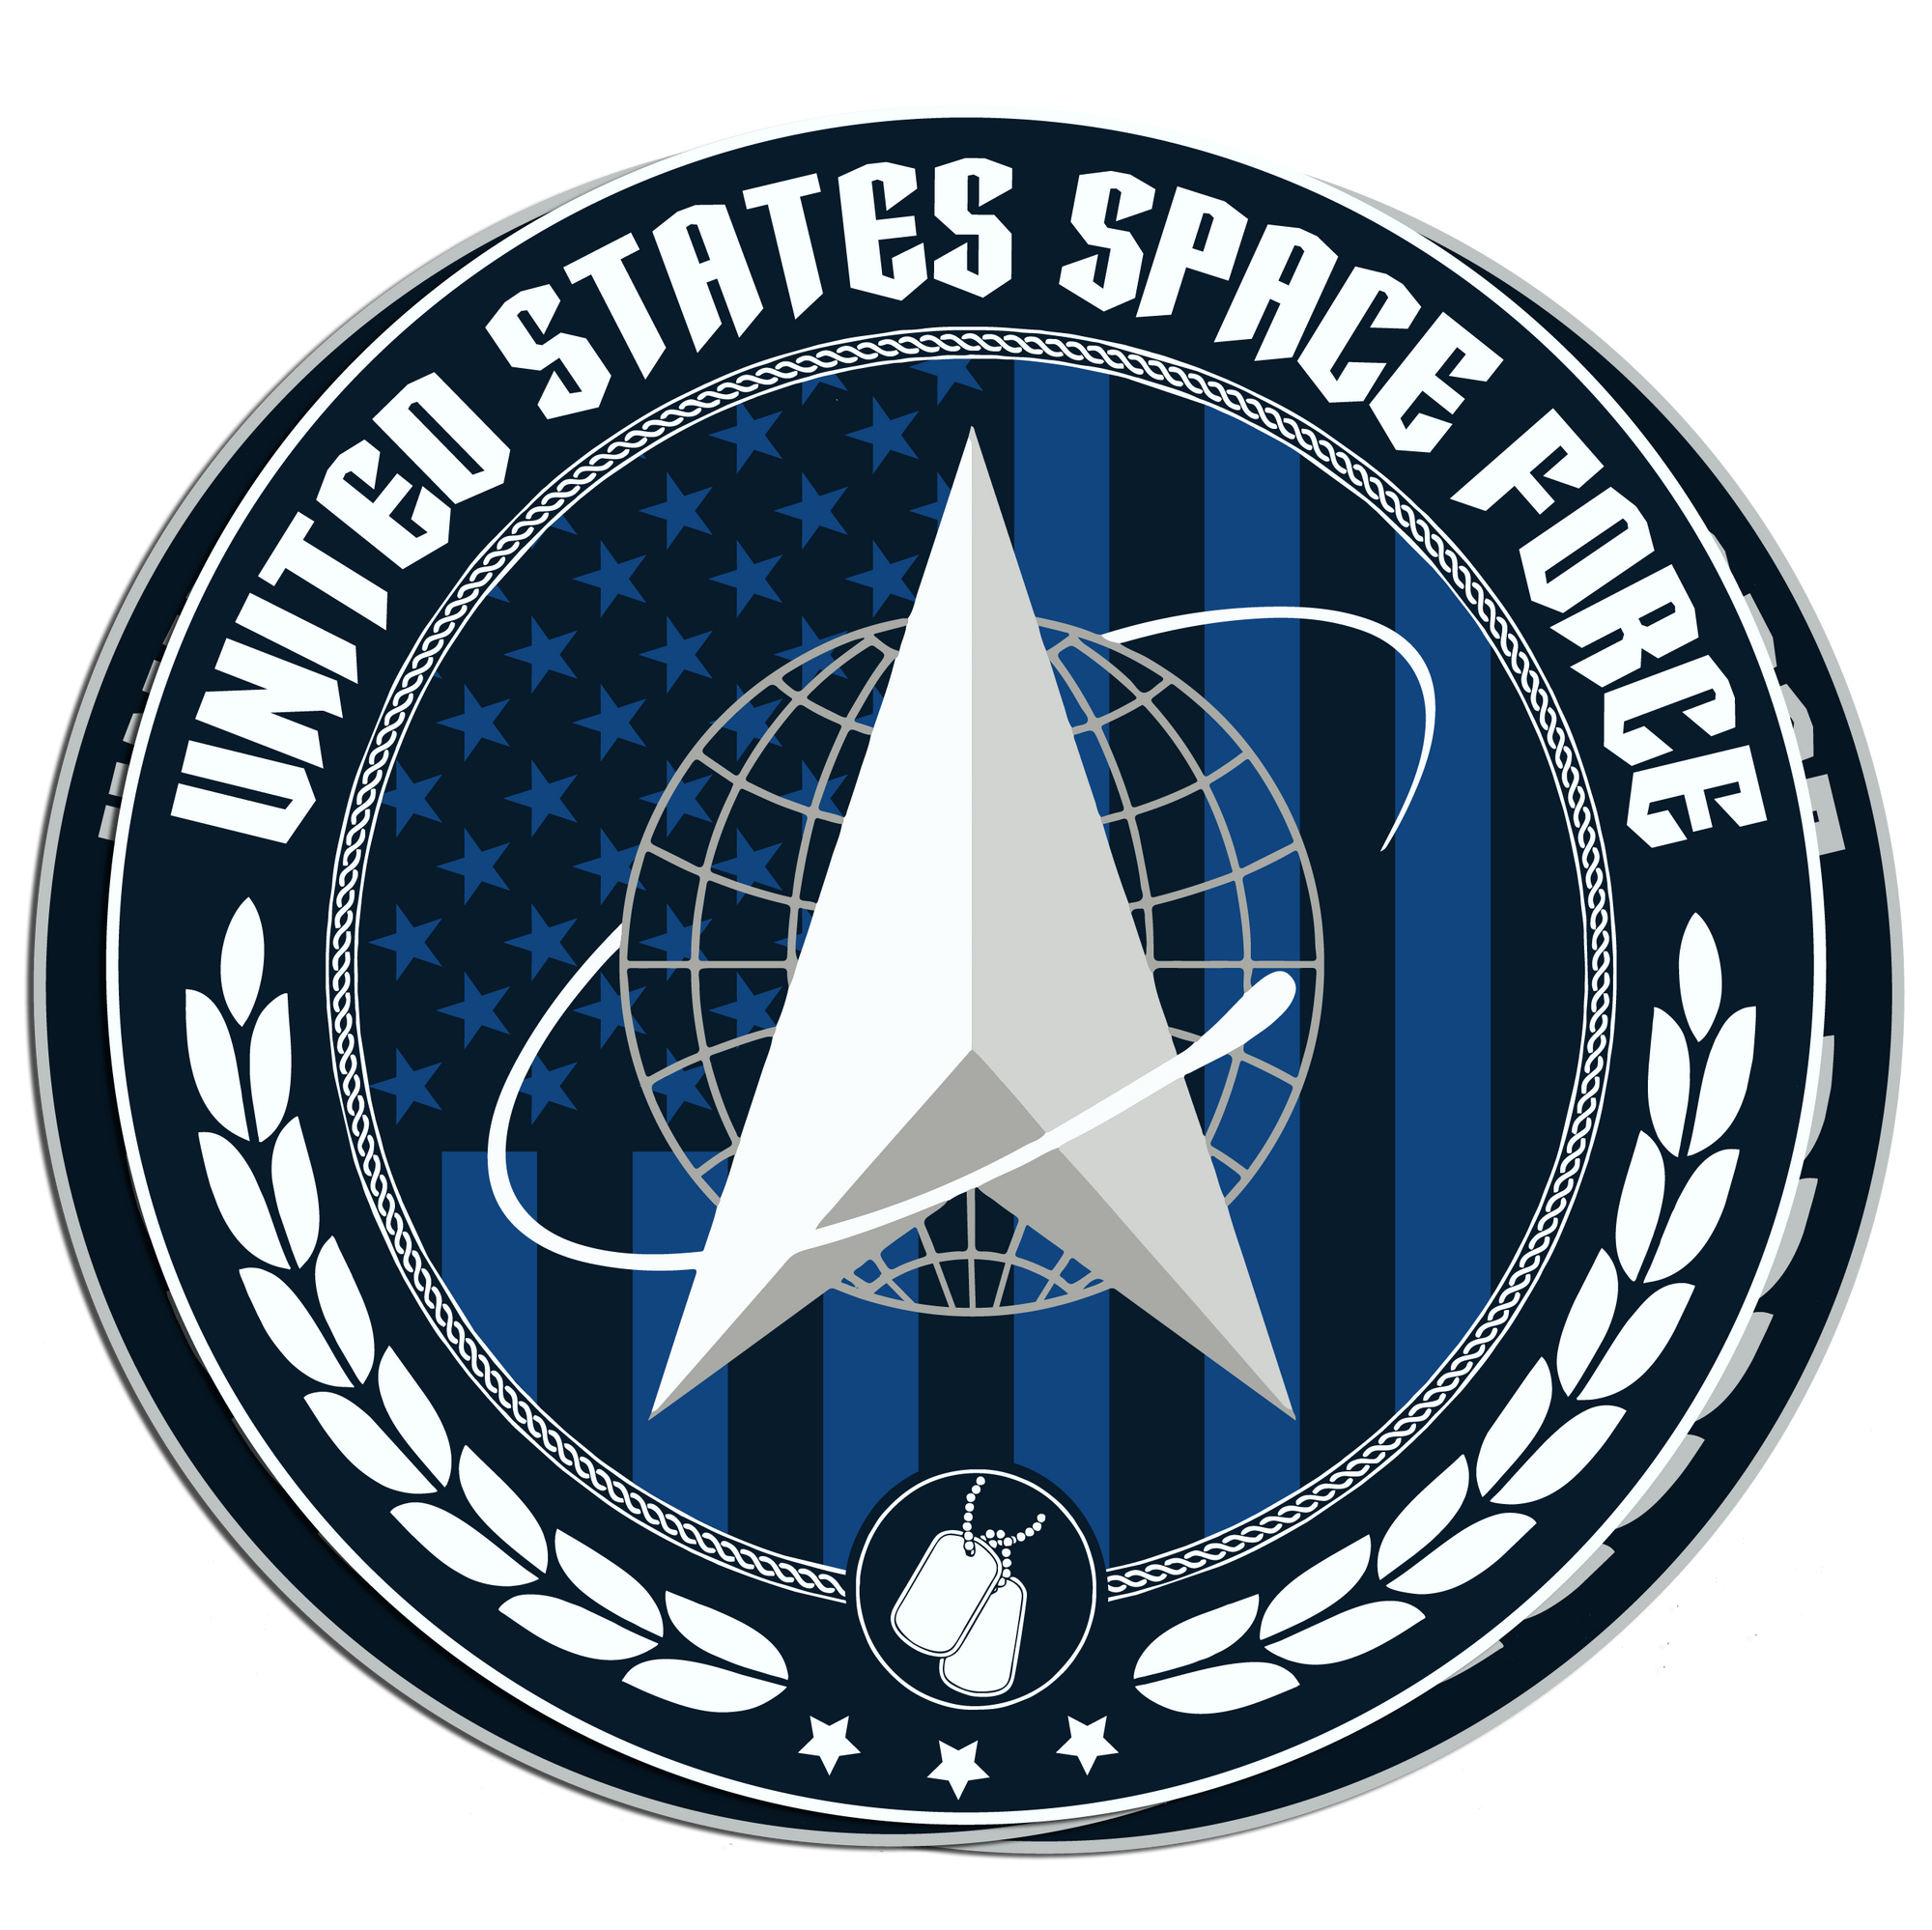 "U.S Space Force" - Decal